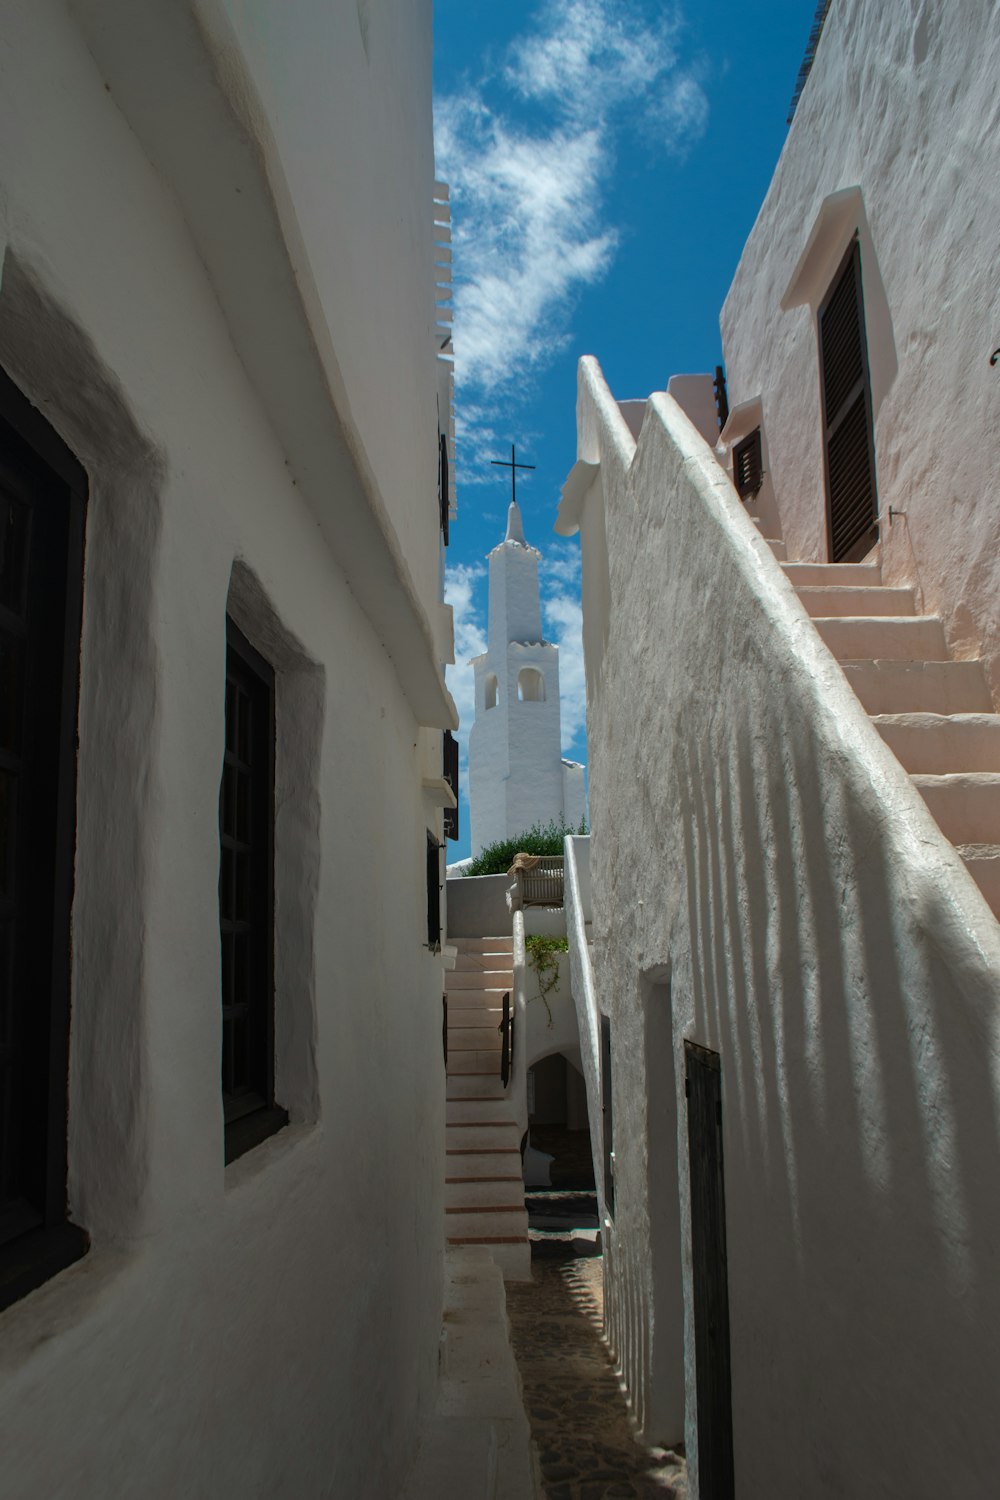 a narrow alley with white buildings and a steeple in the background